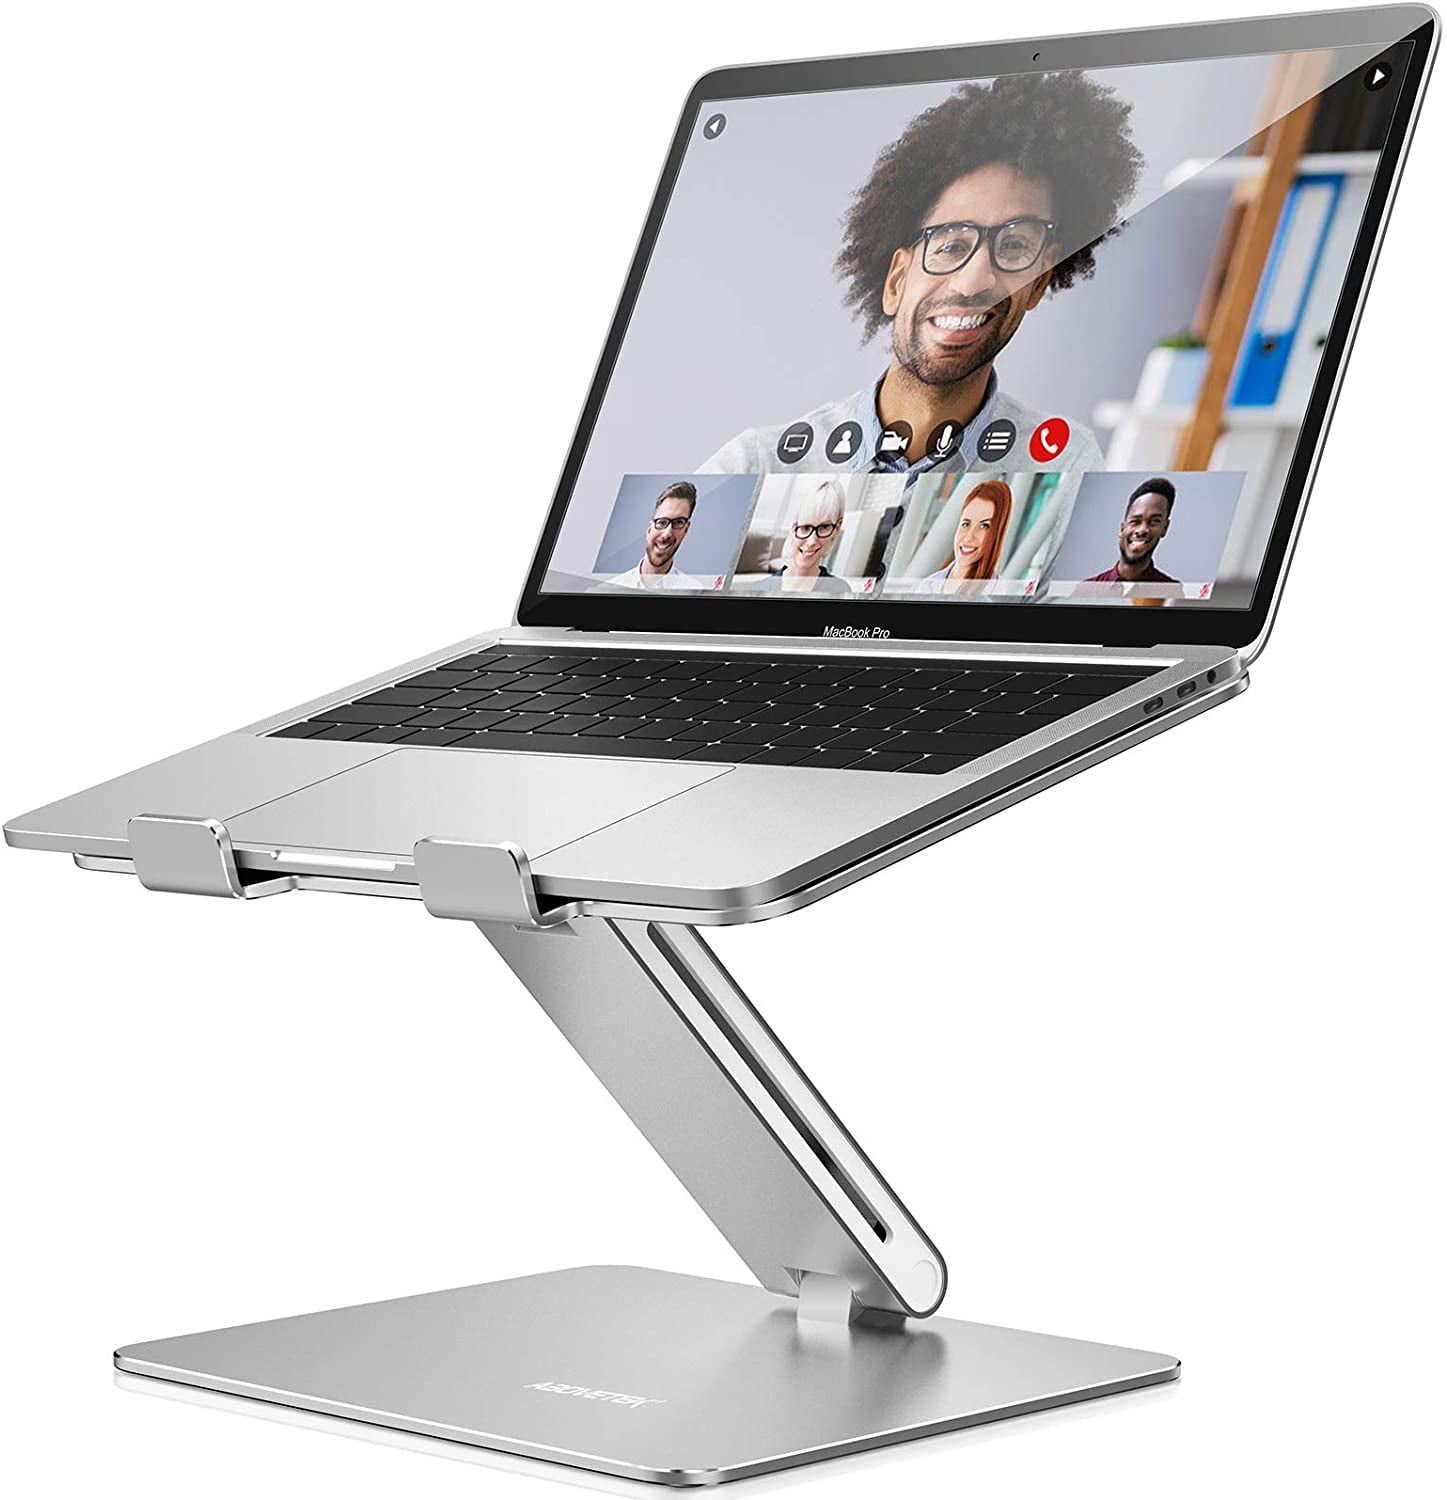 Ergonomic Laptops Riser for Desk LANGTU Aluminum Computer Stand Holder Metal Mount Compatible with Mac MacBook Pro Air Lenovo HP Laptop Stand Dell More 10-15.6 Inch PC Notebook 